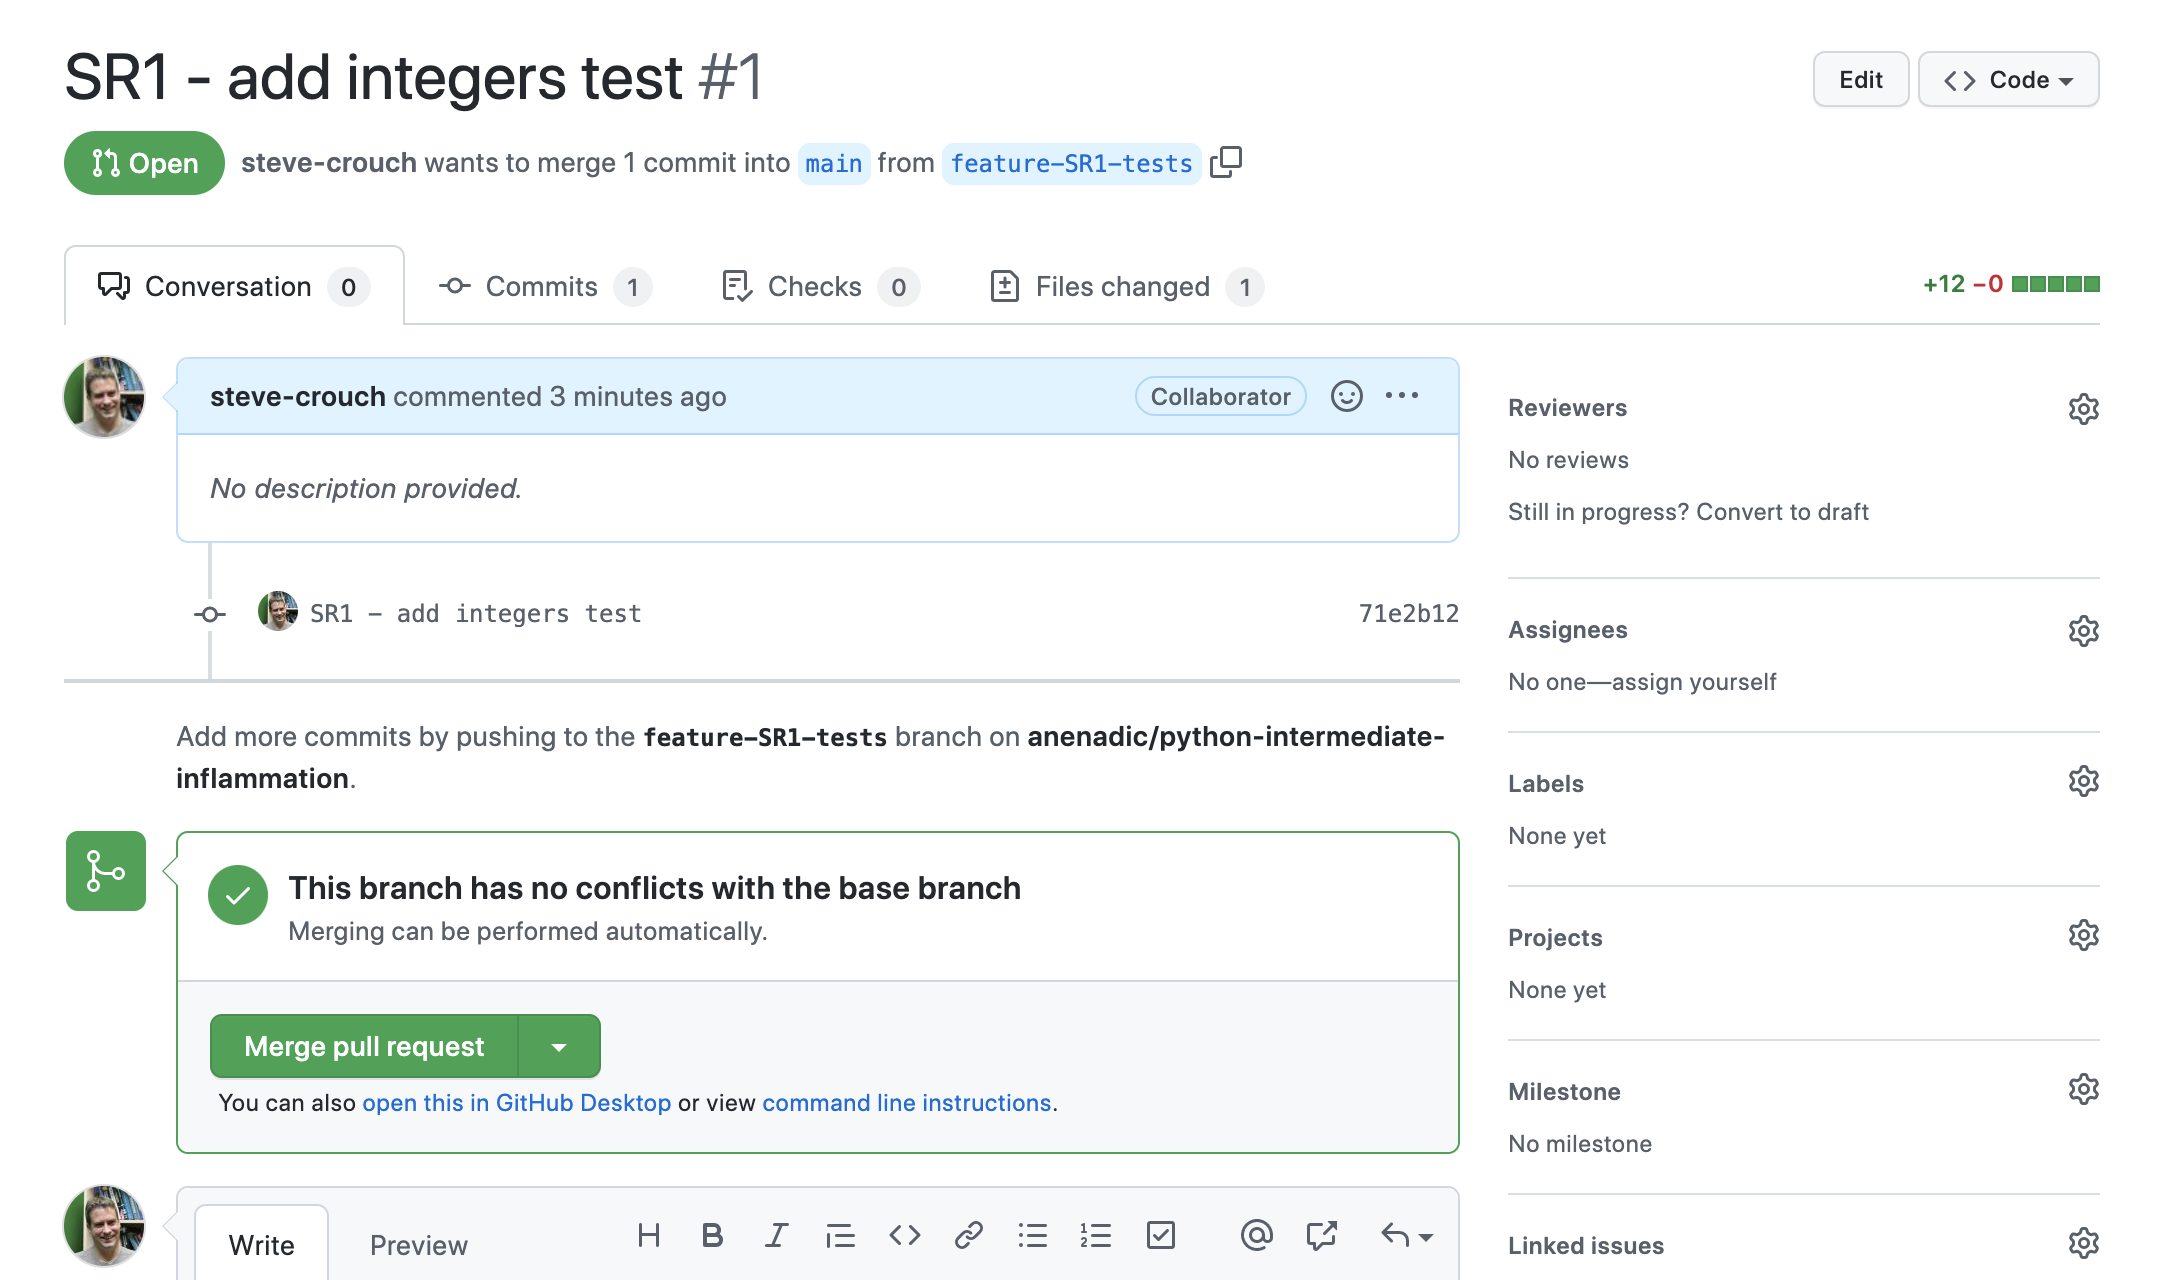 Merging a pull request in GitHub